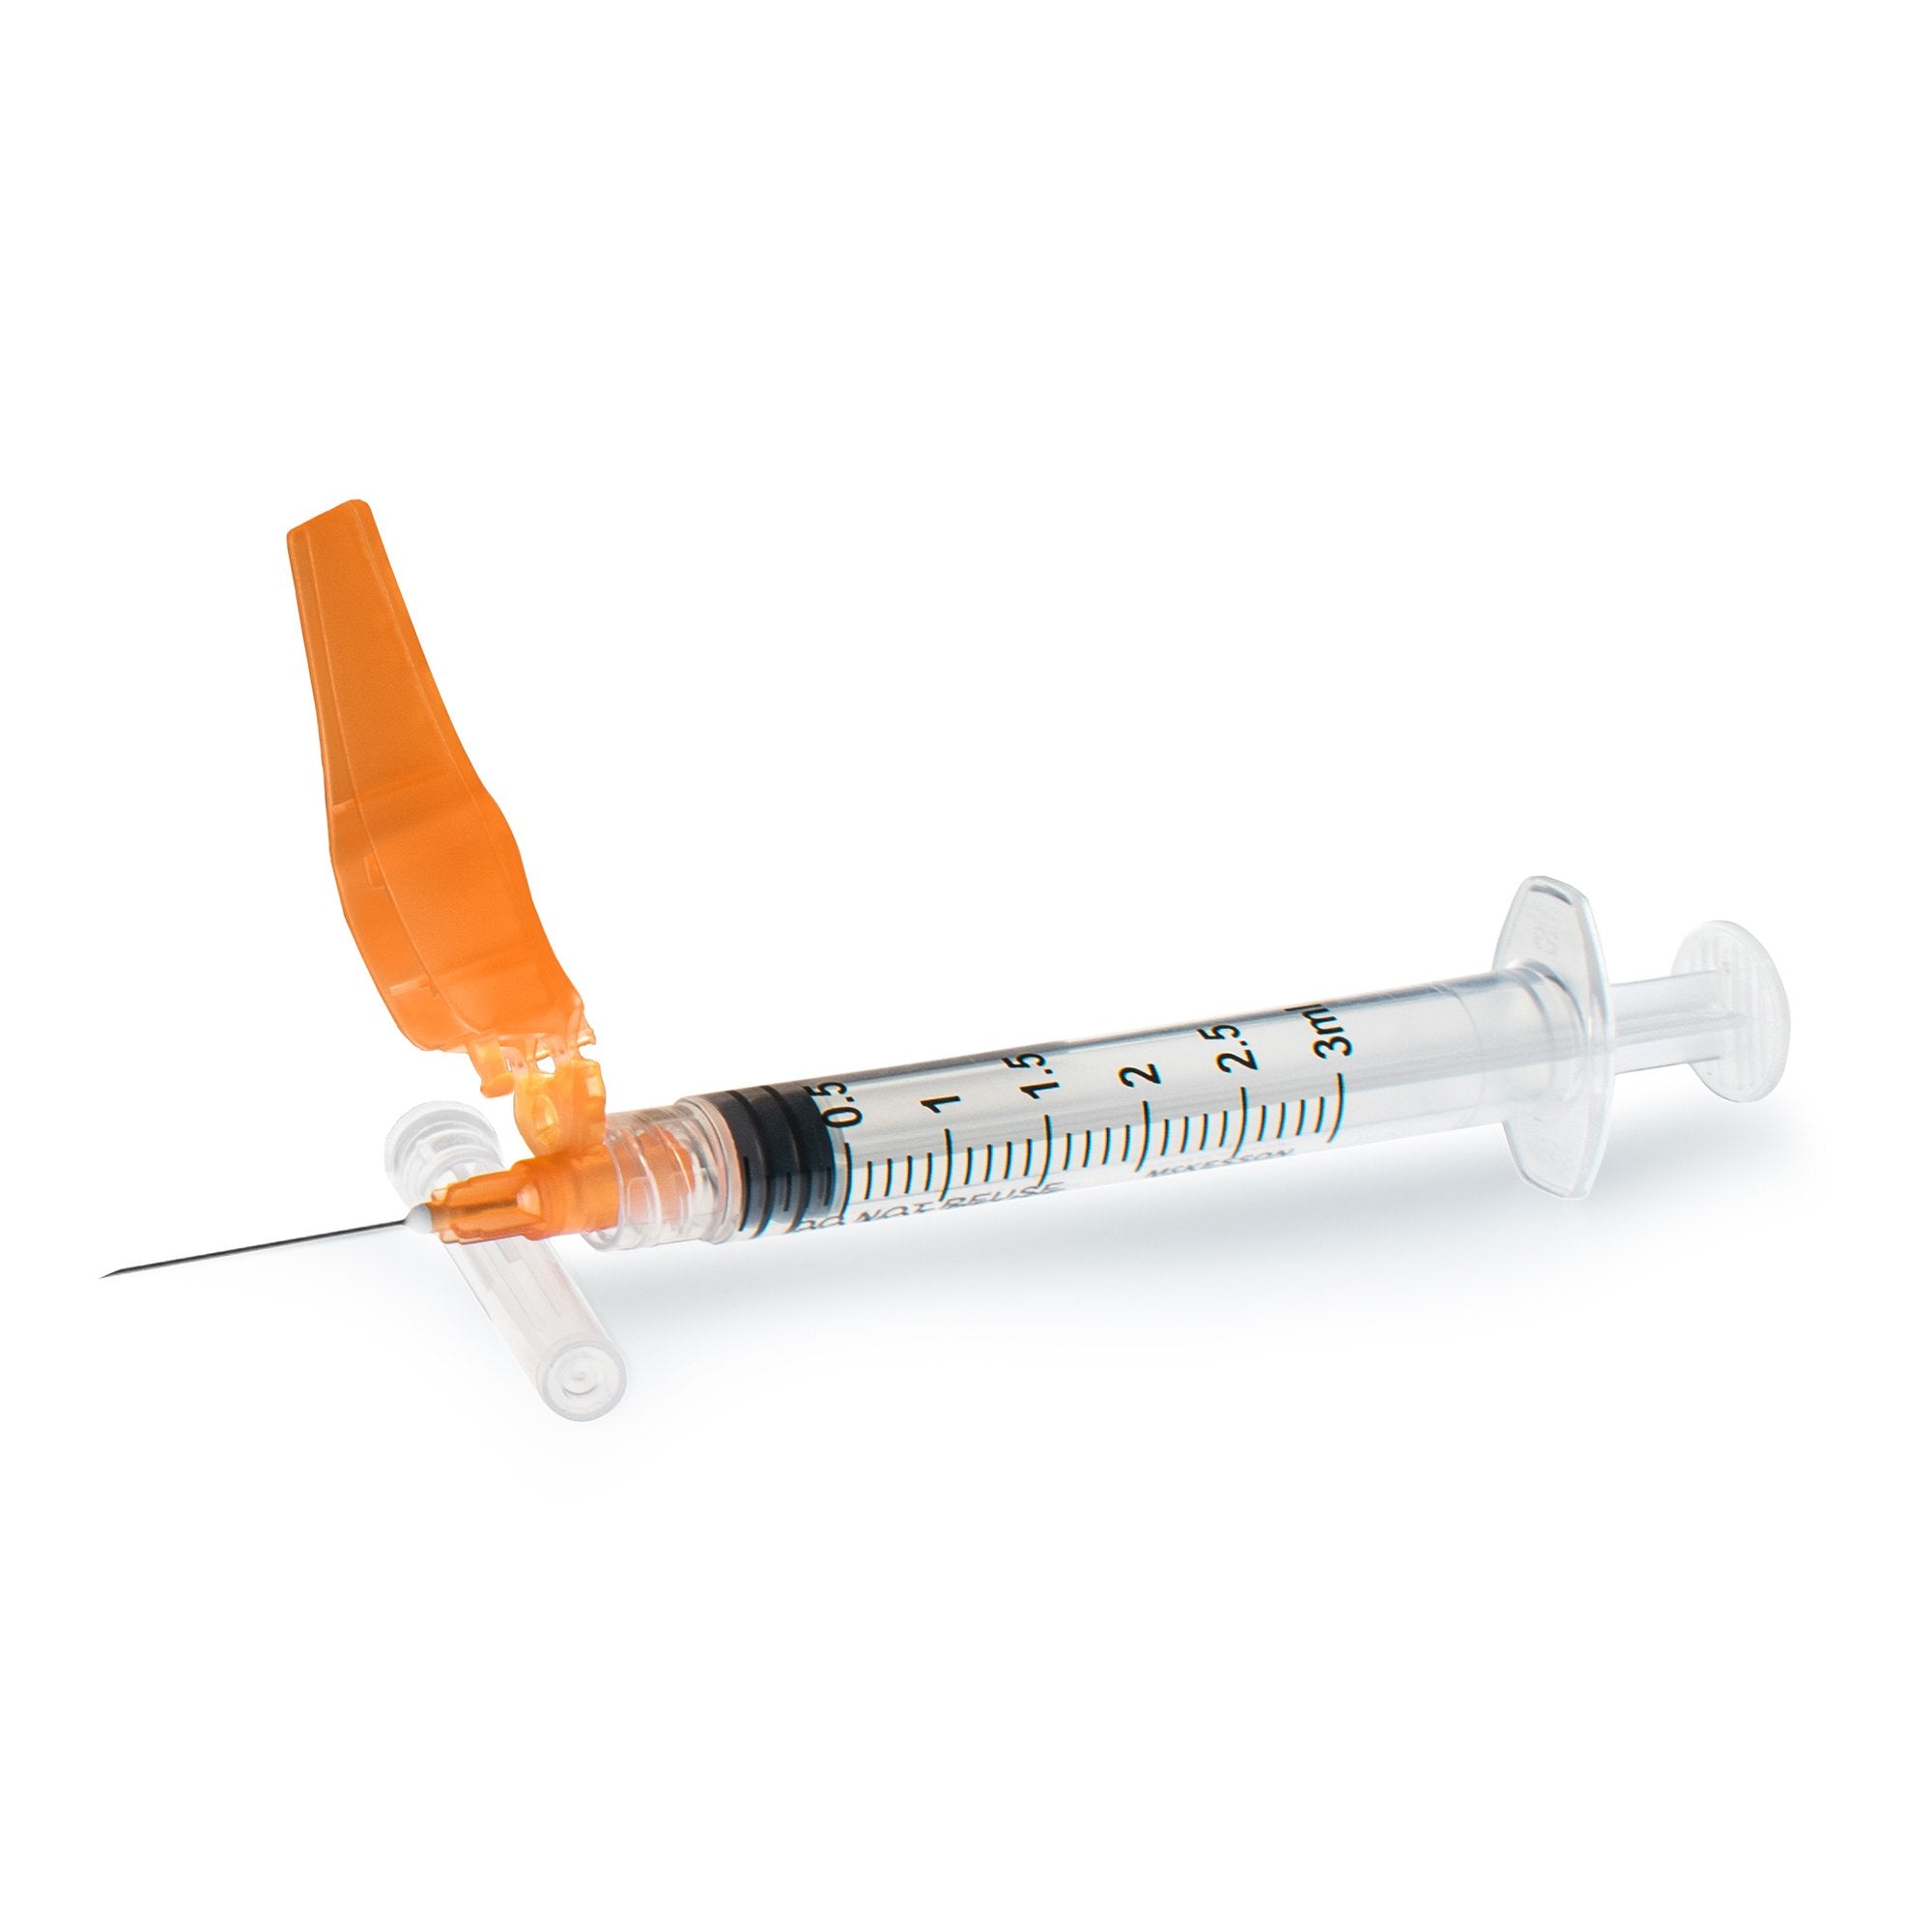 Safety Hypodermic Syringe with Needle - 1 inch 25 gauge